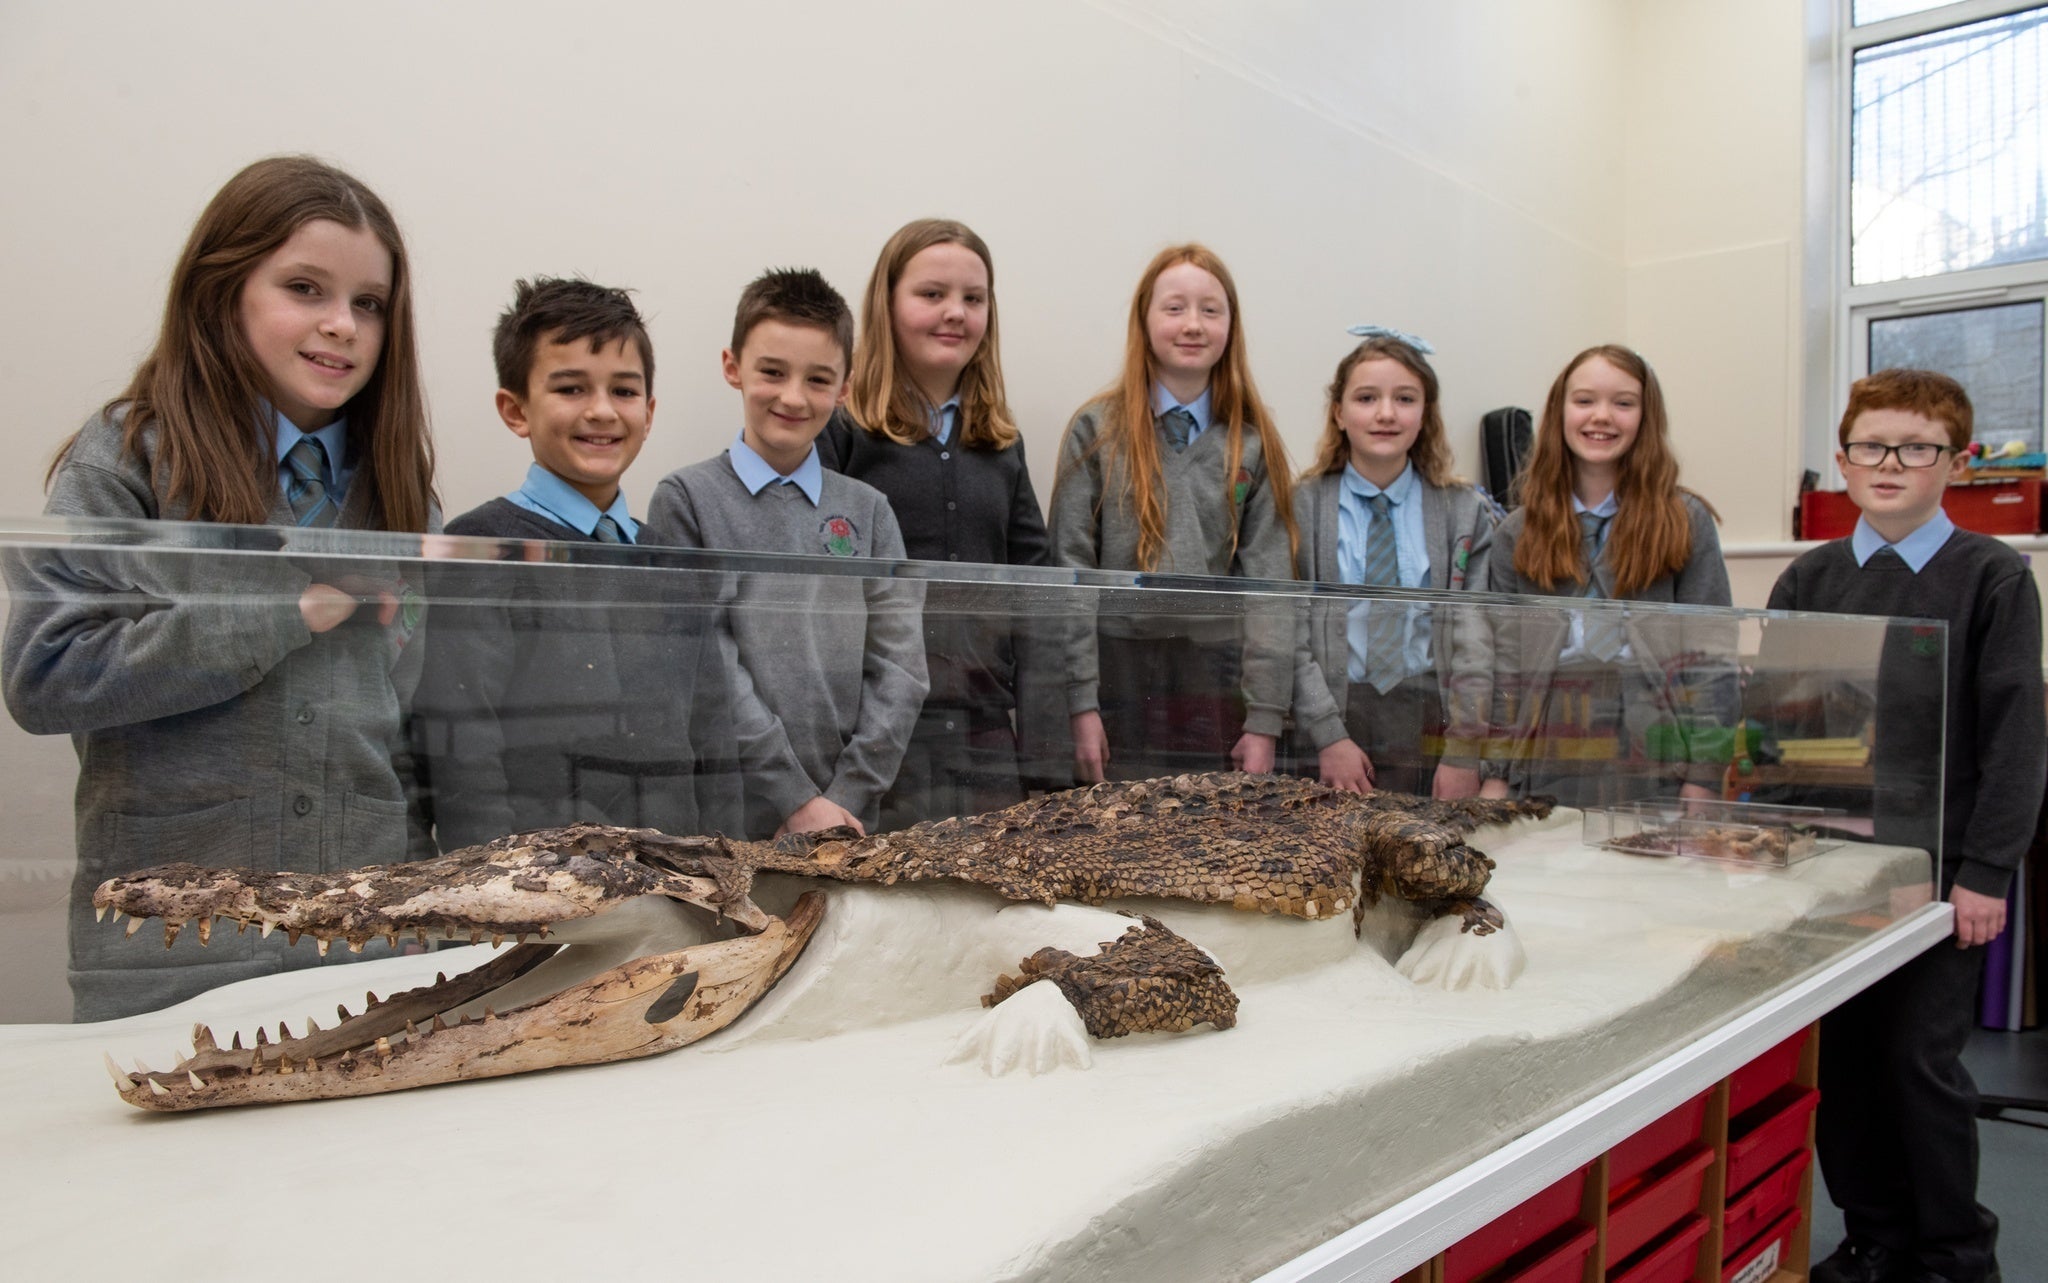 The meticulously conserved croc has been put on display at a Rhondda primary school for everyone to enjoy. (Rhondda Cynon Taf Council)